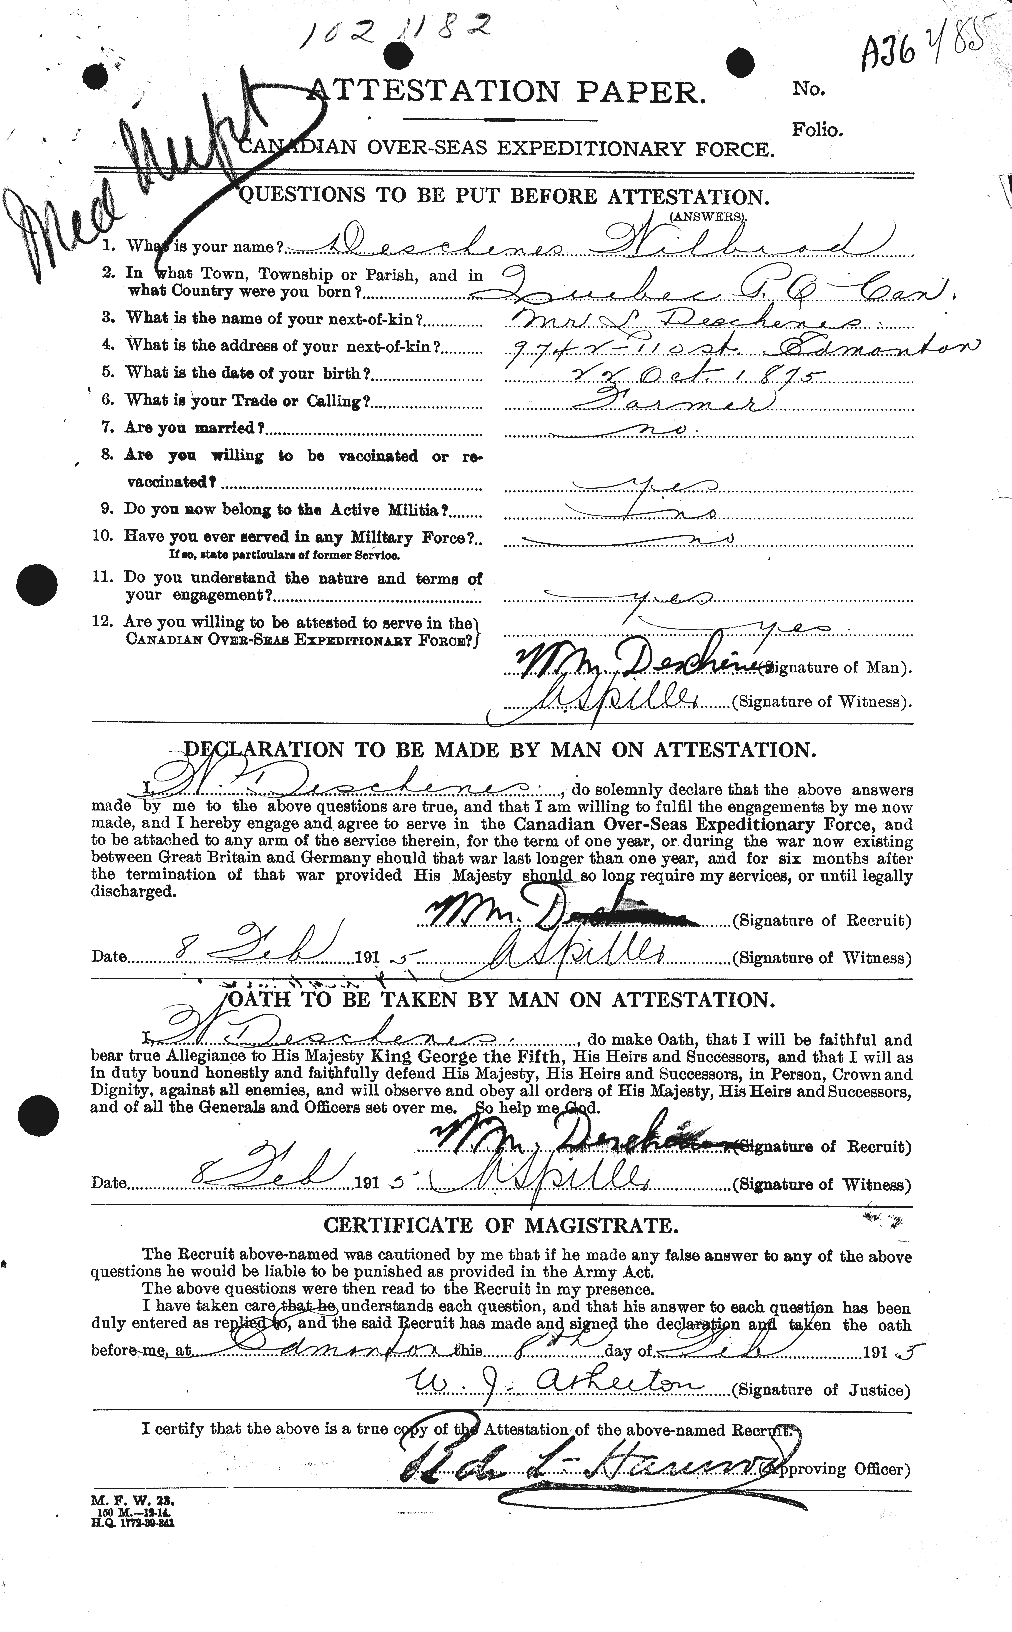 Personnel Records of the First World War - CEF 290243a